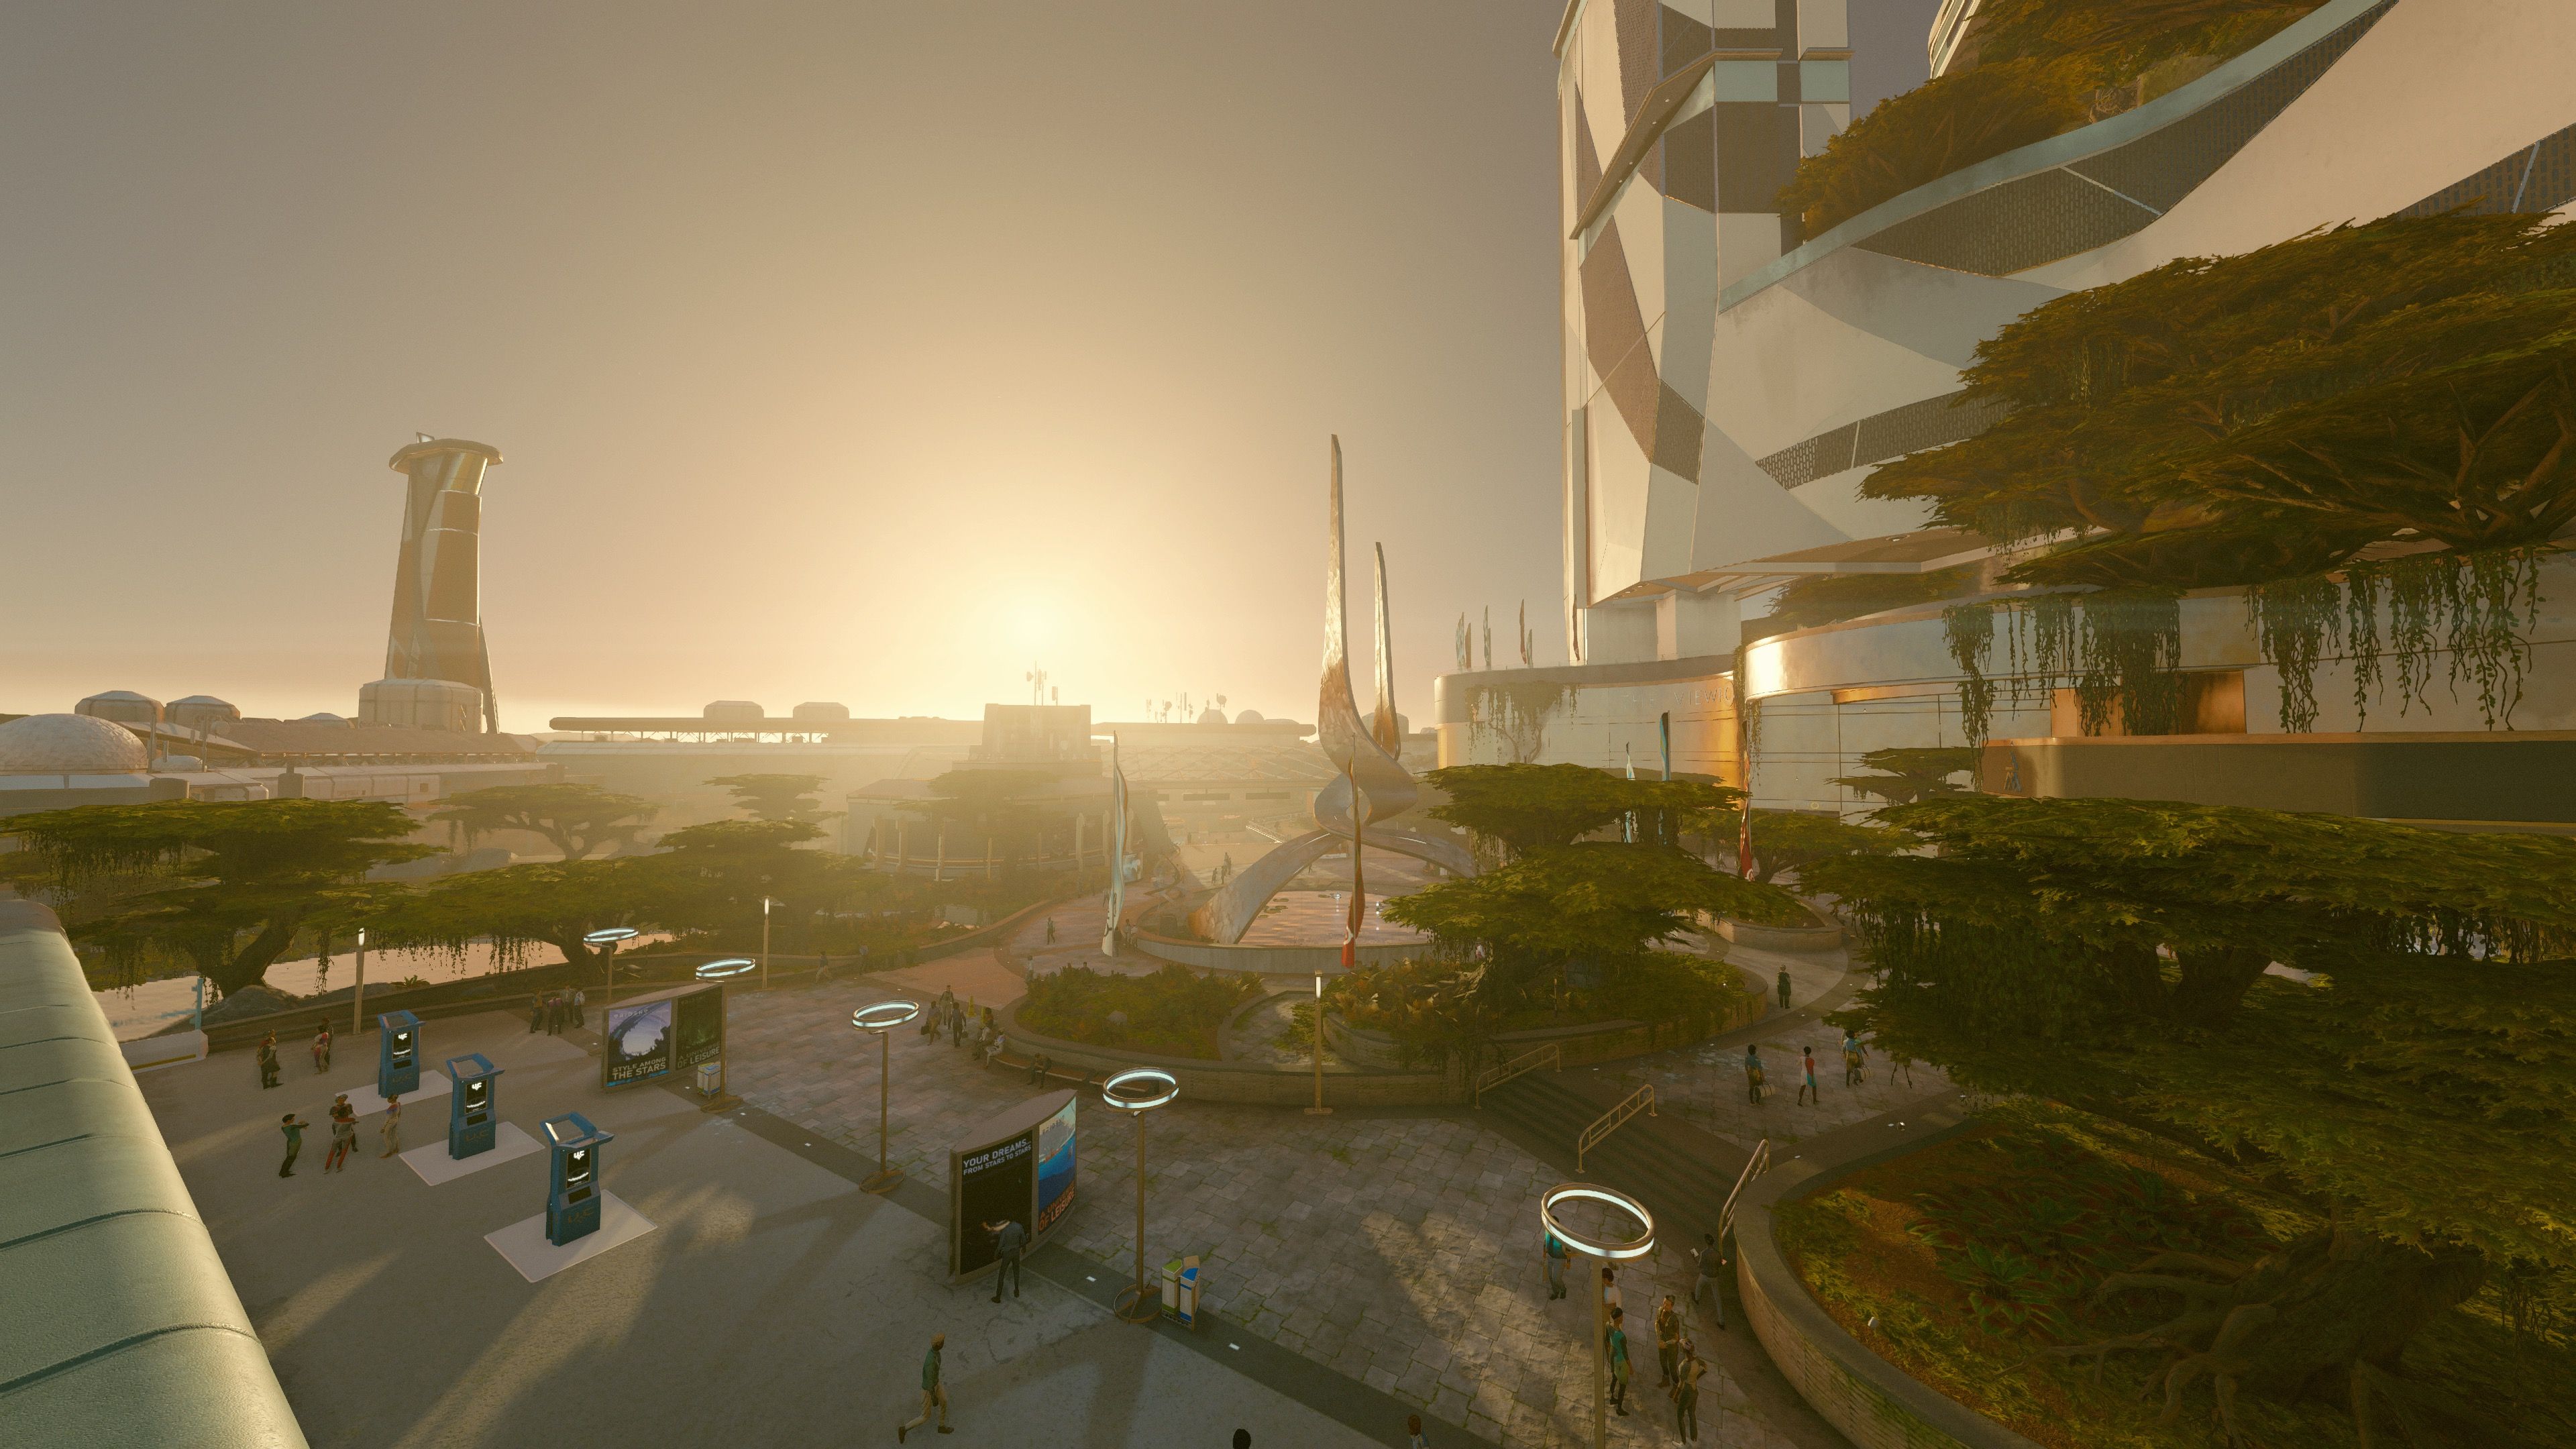 A screenshot from Starfield of the sunrise over, uh, one of the districts (I forget which one it was) on Jemison in the Alpha Centauri system. It's taken looking over an open public plaza with trees and people walking around, and there's tall, sleek, futuristic buildings as well.